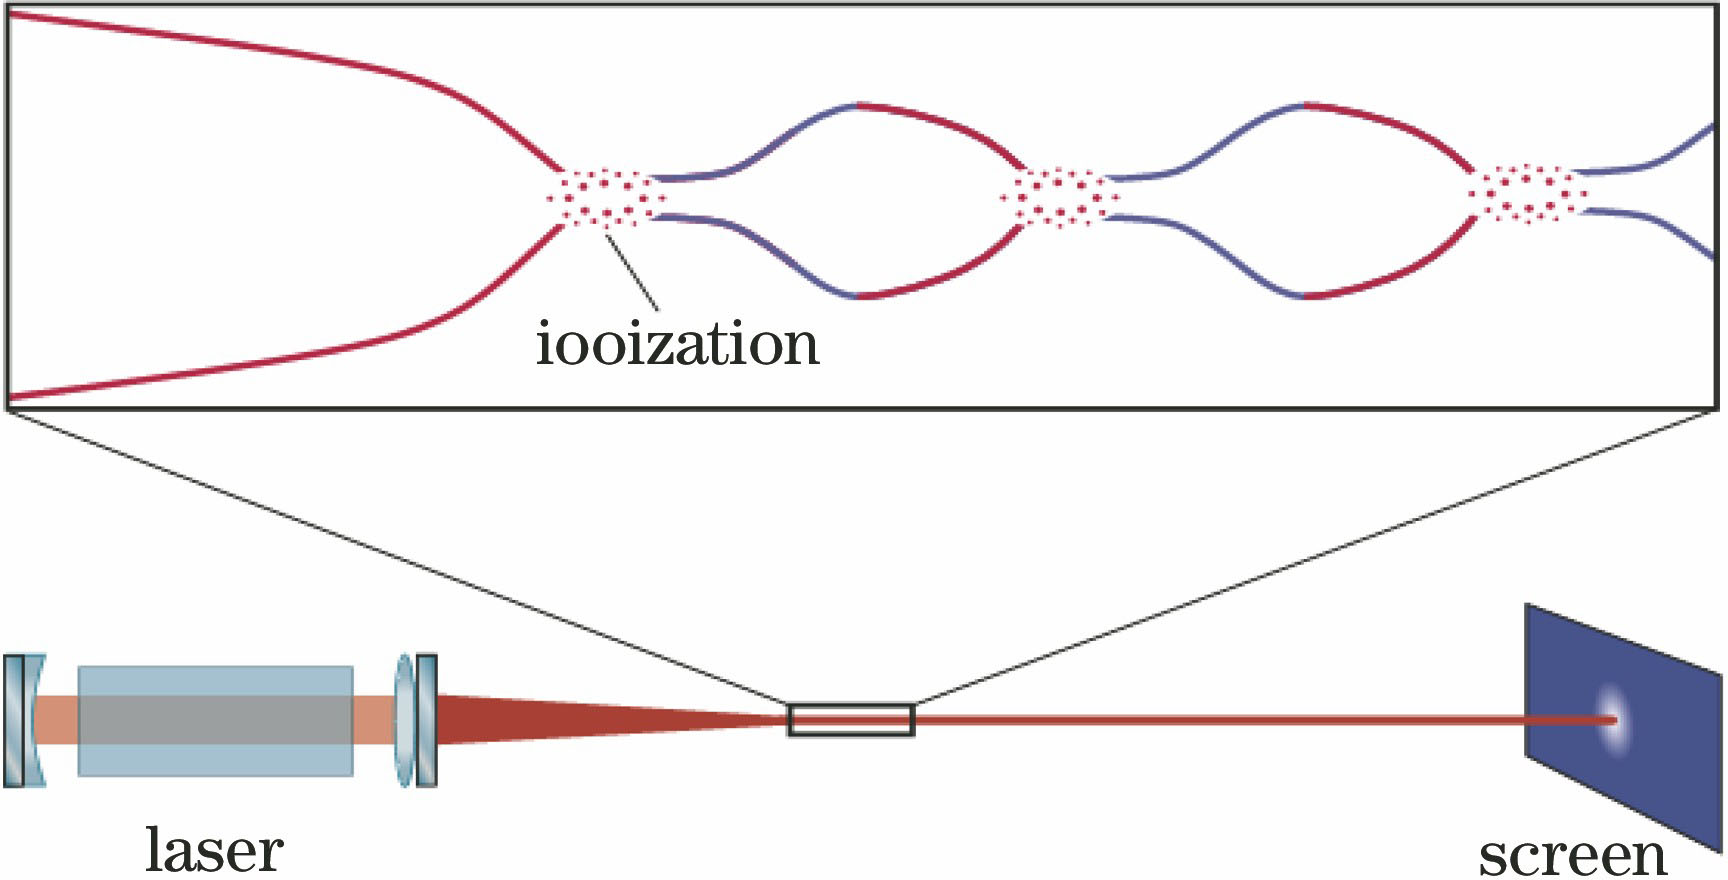 Schematic of formation of femtosecond laser filament[9]